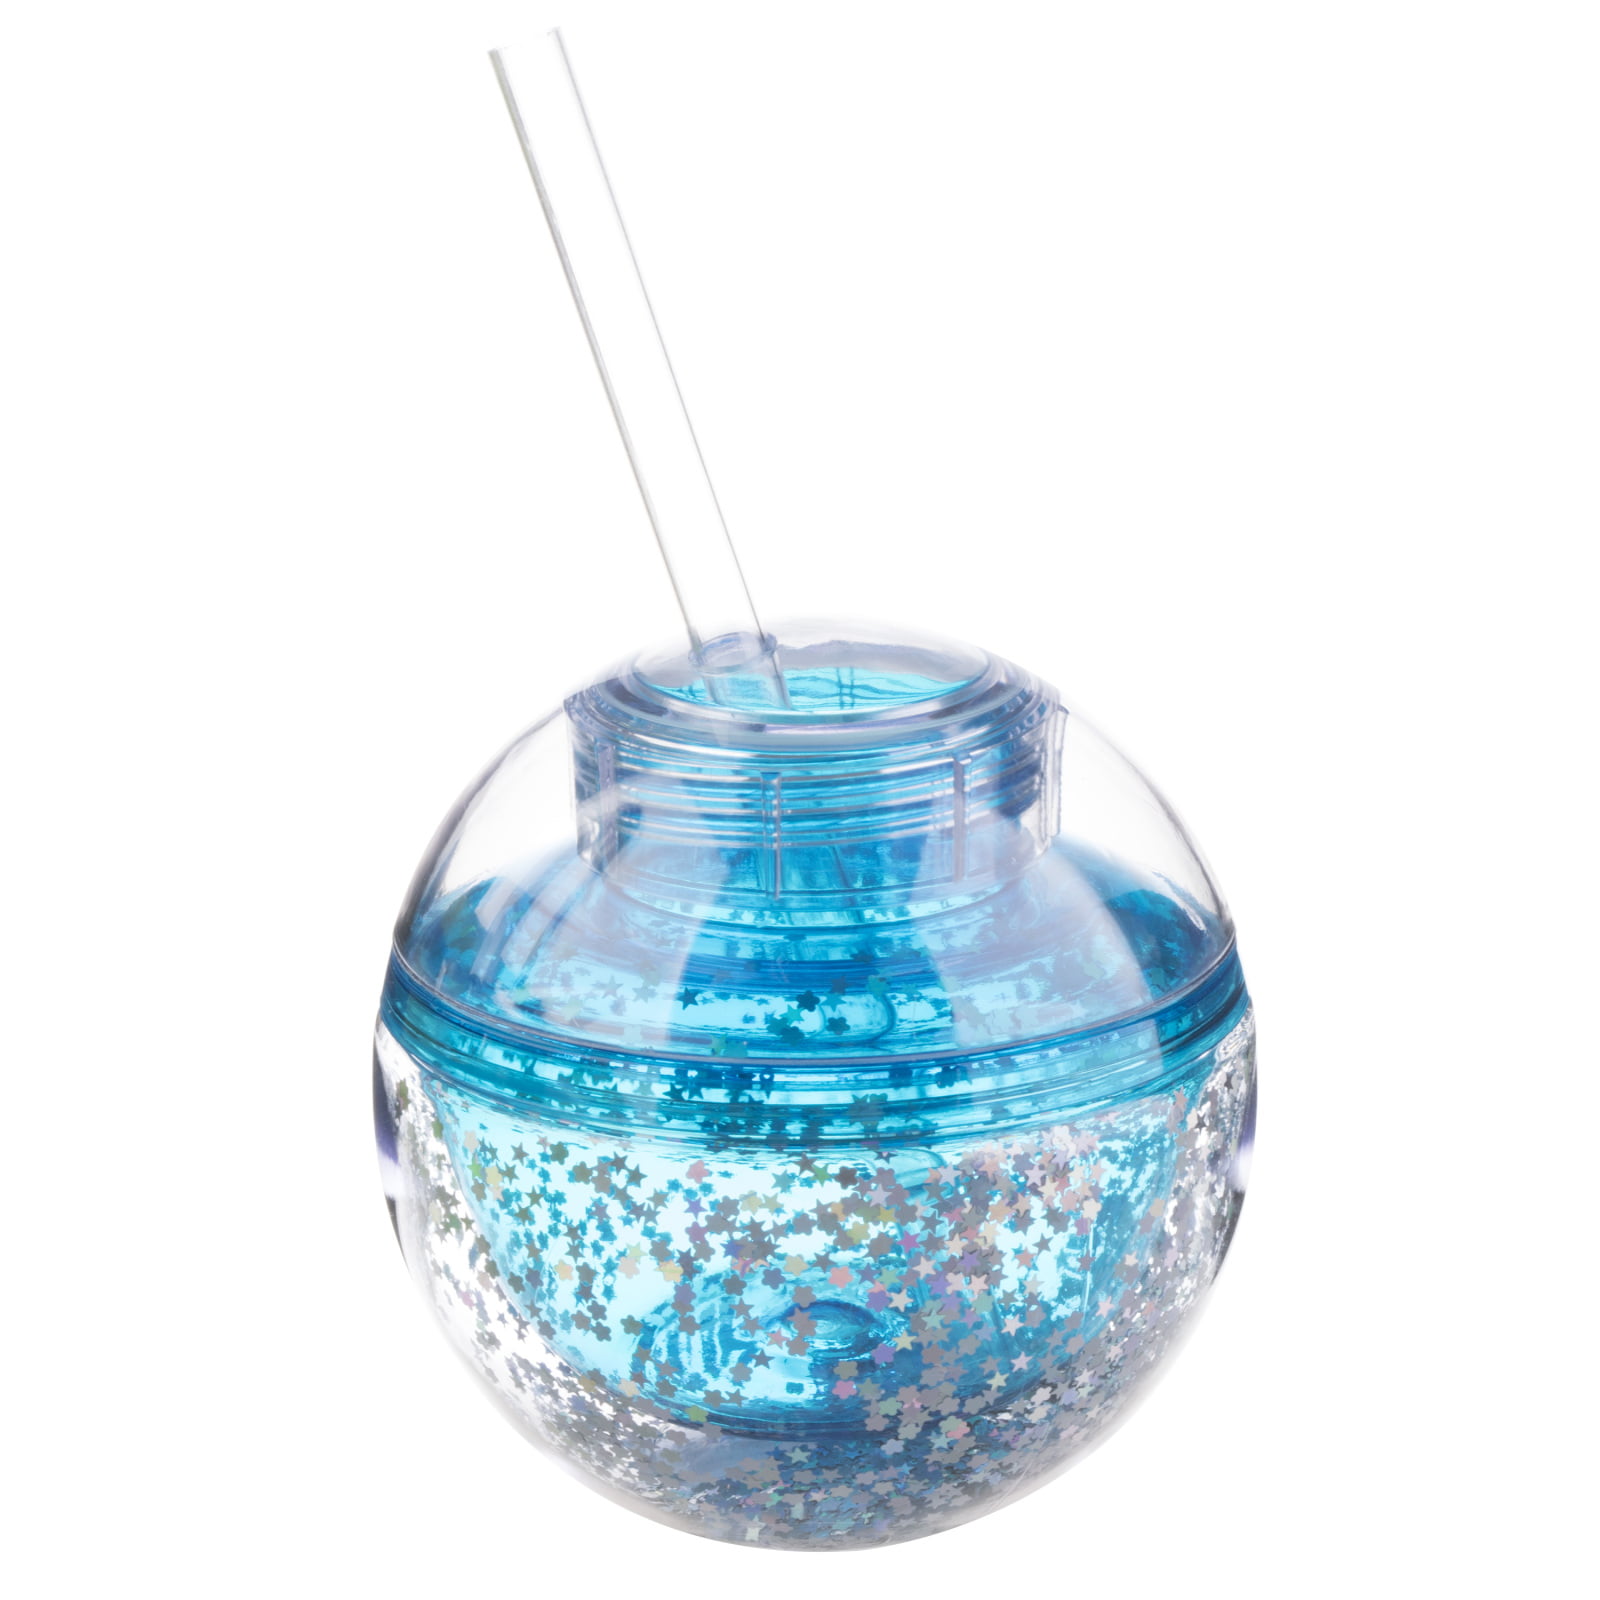 Mainstays Party Ball Water Bottle, Pack of 4, Teal Glitter